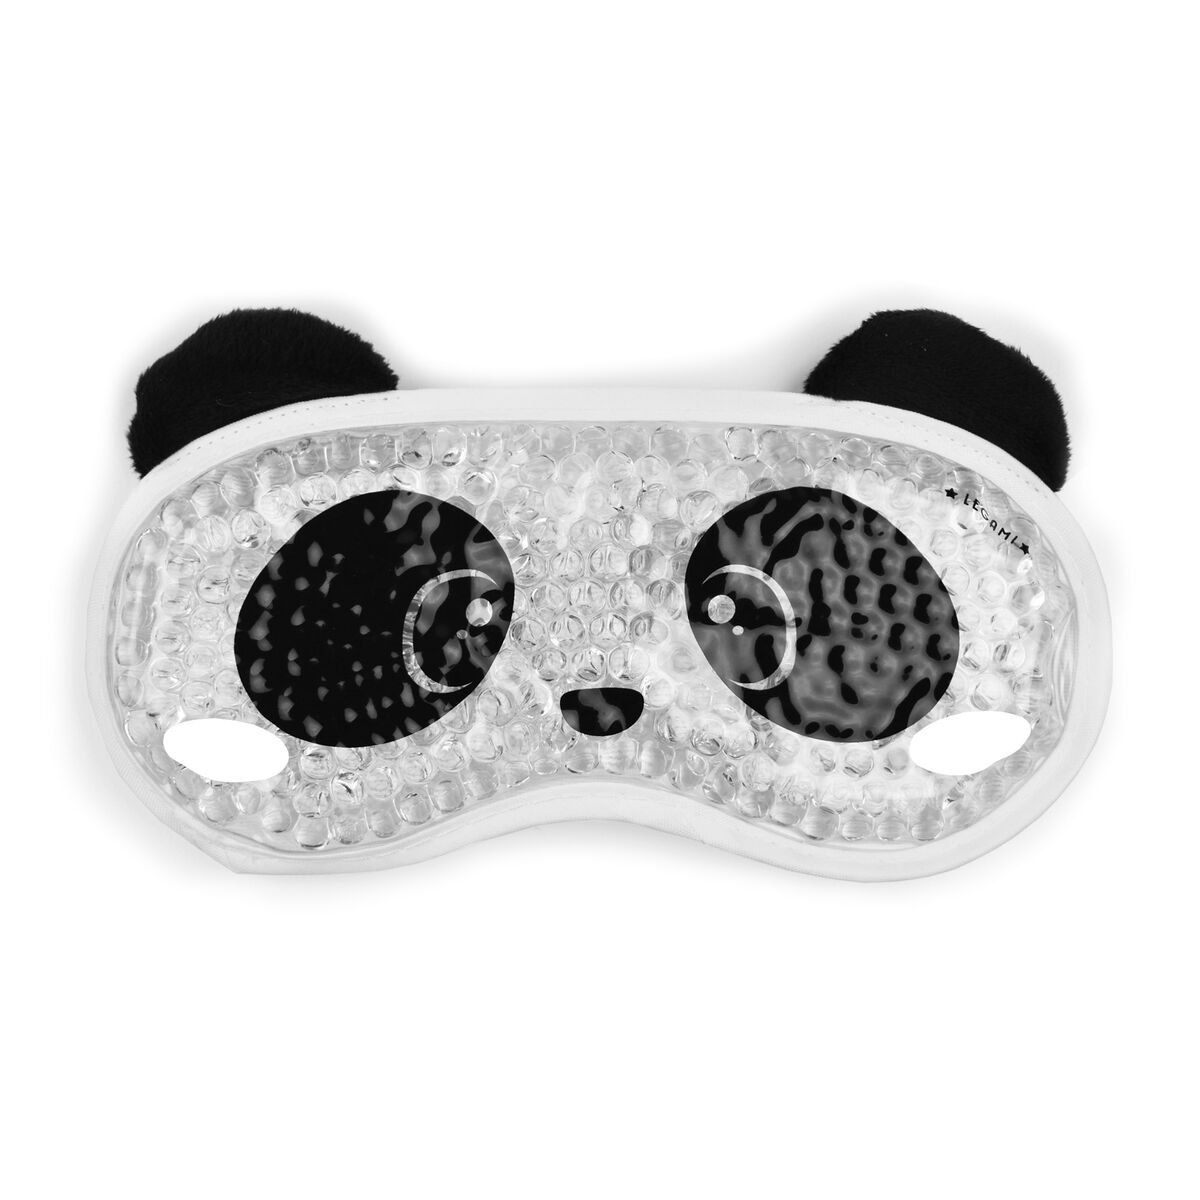 Legami Milano Chill Out Gel Eye Mask